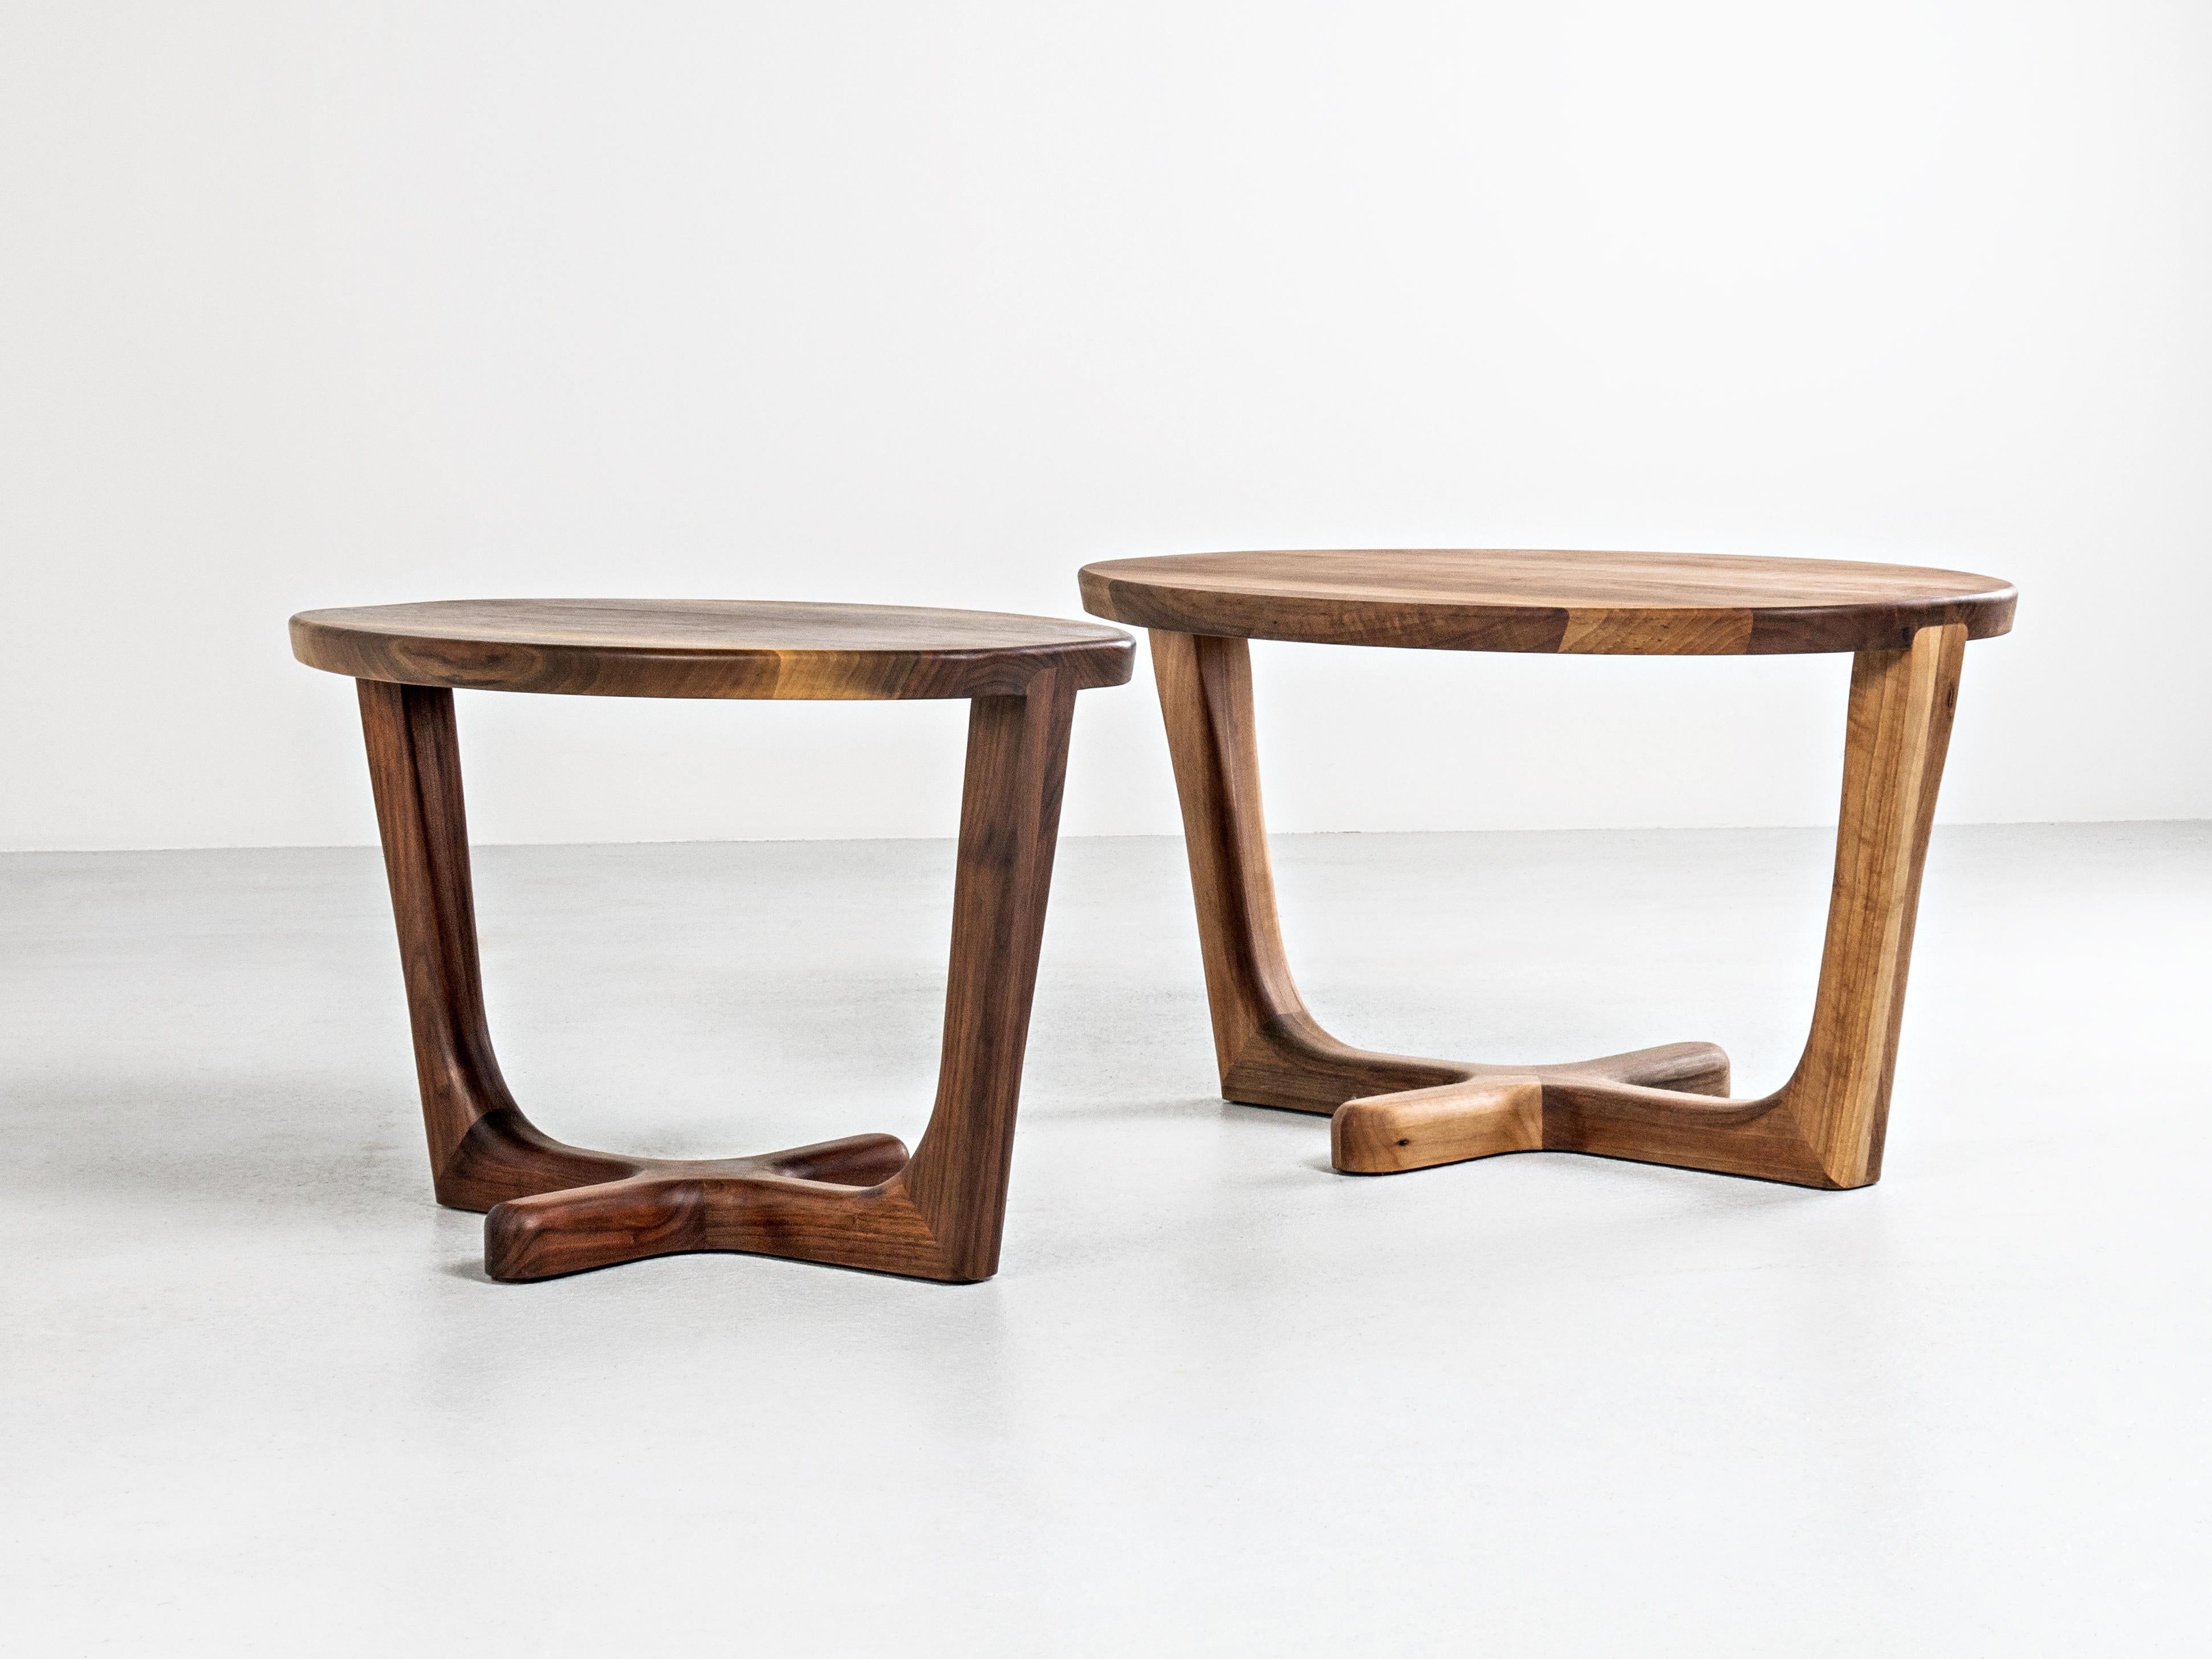 Armada coffee table follows the idea of the whole collection, using lightness and powerful shapes to emphasize its appearance, as well as every piece of the Armada collection. Armada coffee table can be made from different types of solid wood, such